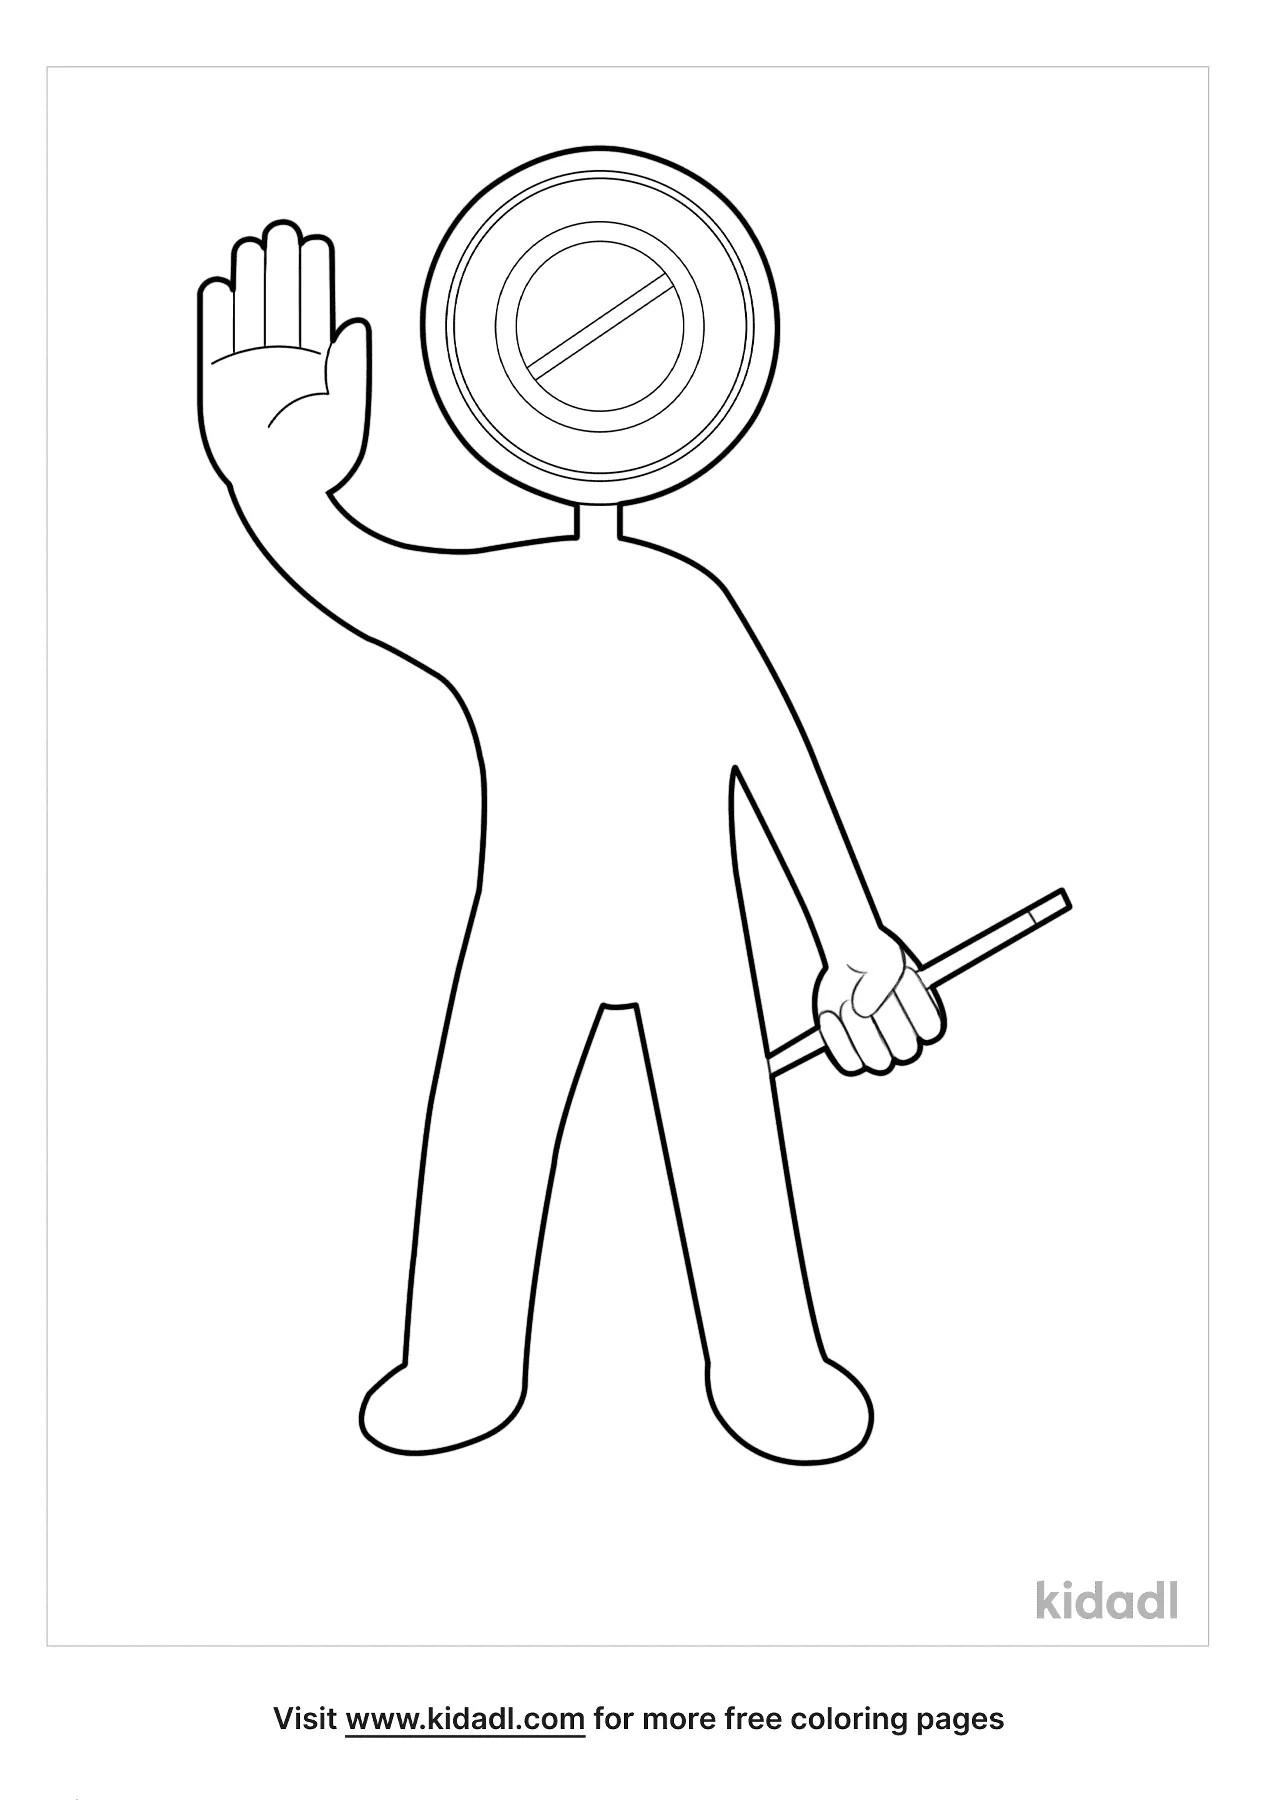 stop sign coloring pages free emojis shapes and signs coloring pages kidadl